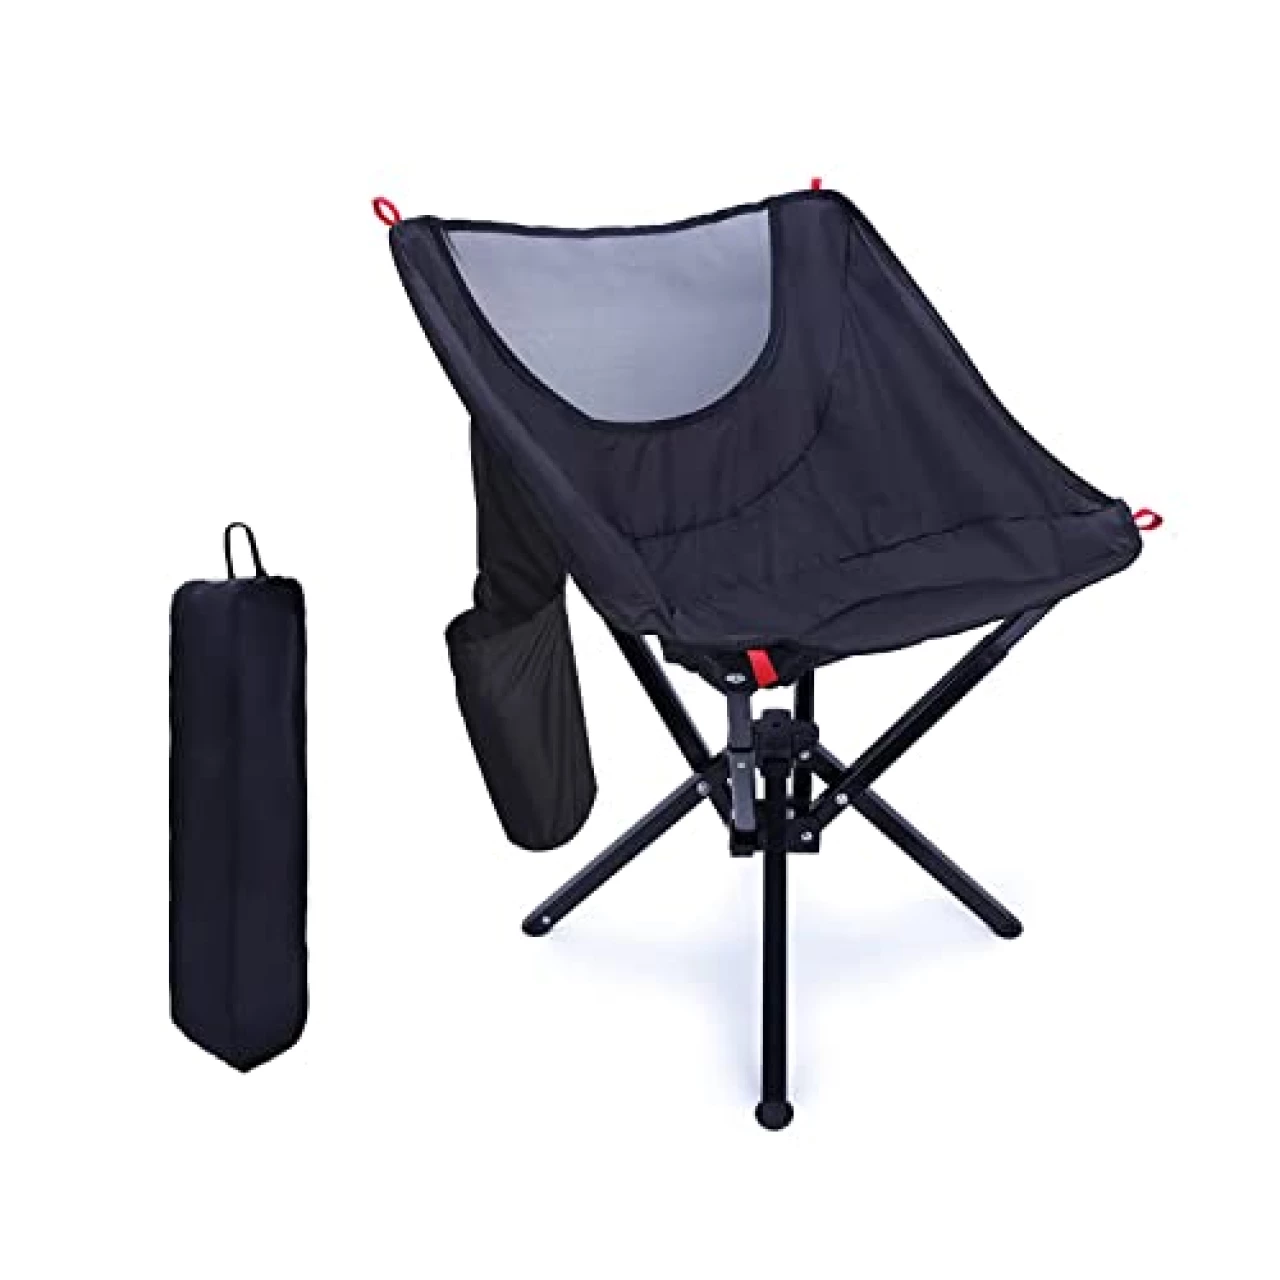 Closed Loop Trading Outdoor Folding Chair | Lightweight, Compact, &amp; Portable Design with Storage Carry Bag | Quick Setup, Heavy Duty, &amp; Comfortable Chair for Camping, Fishing, Lawn, &amp; Beach (Black)